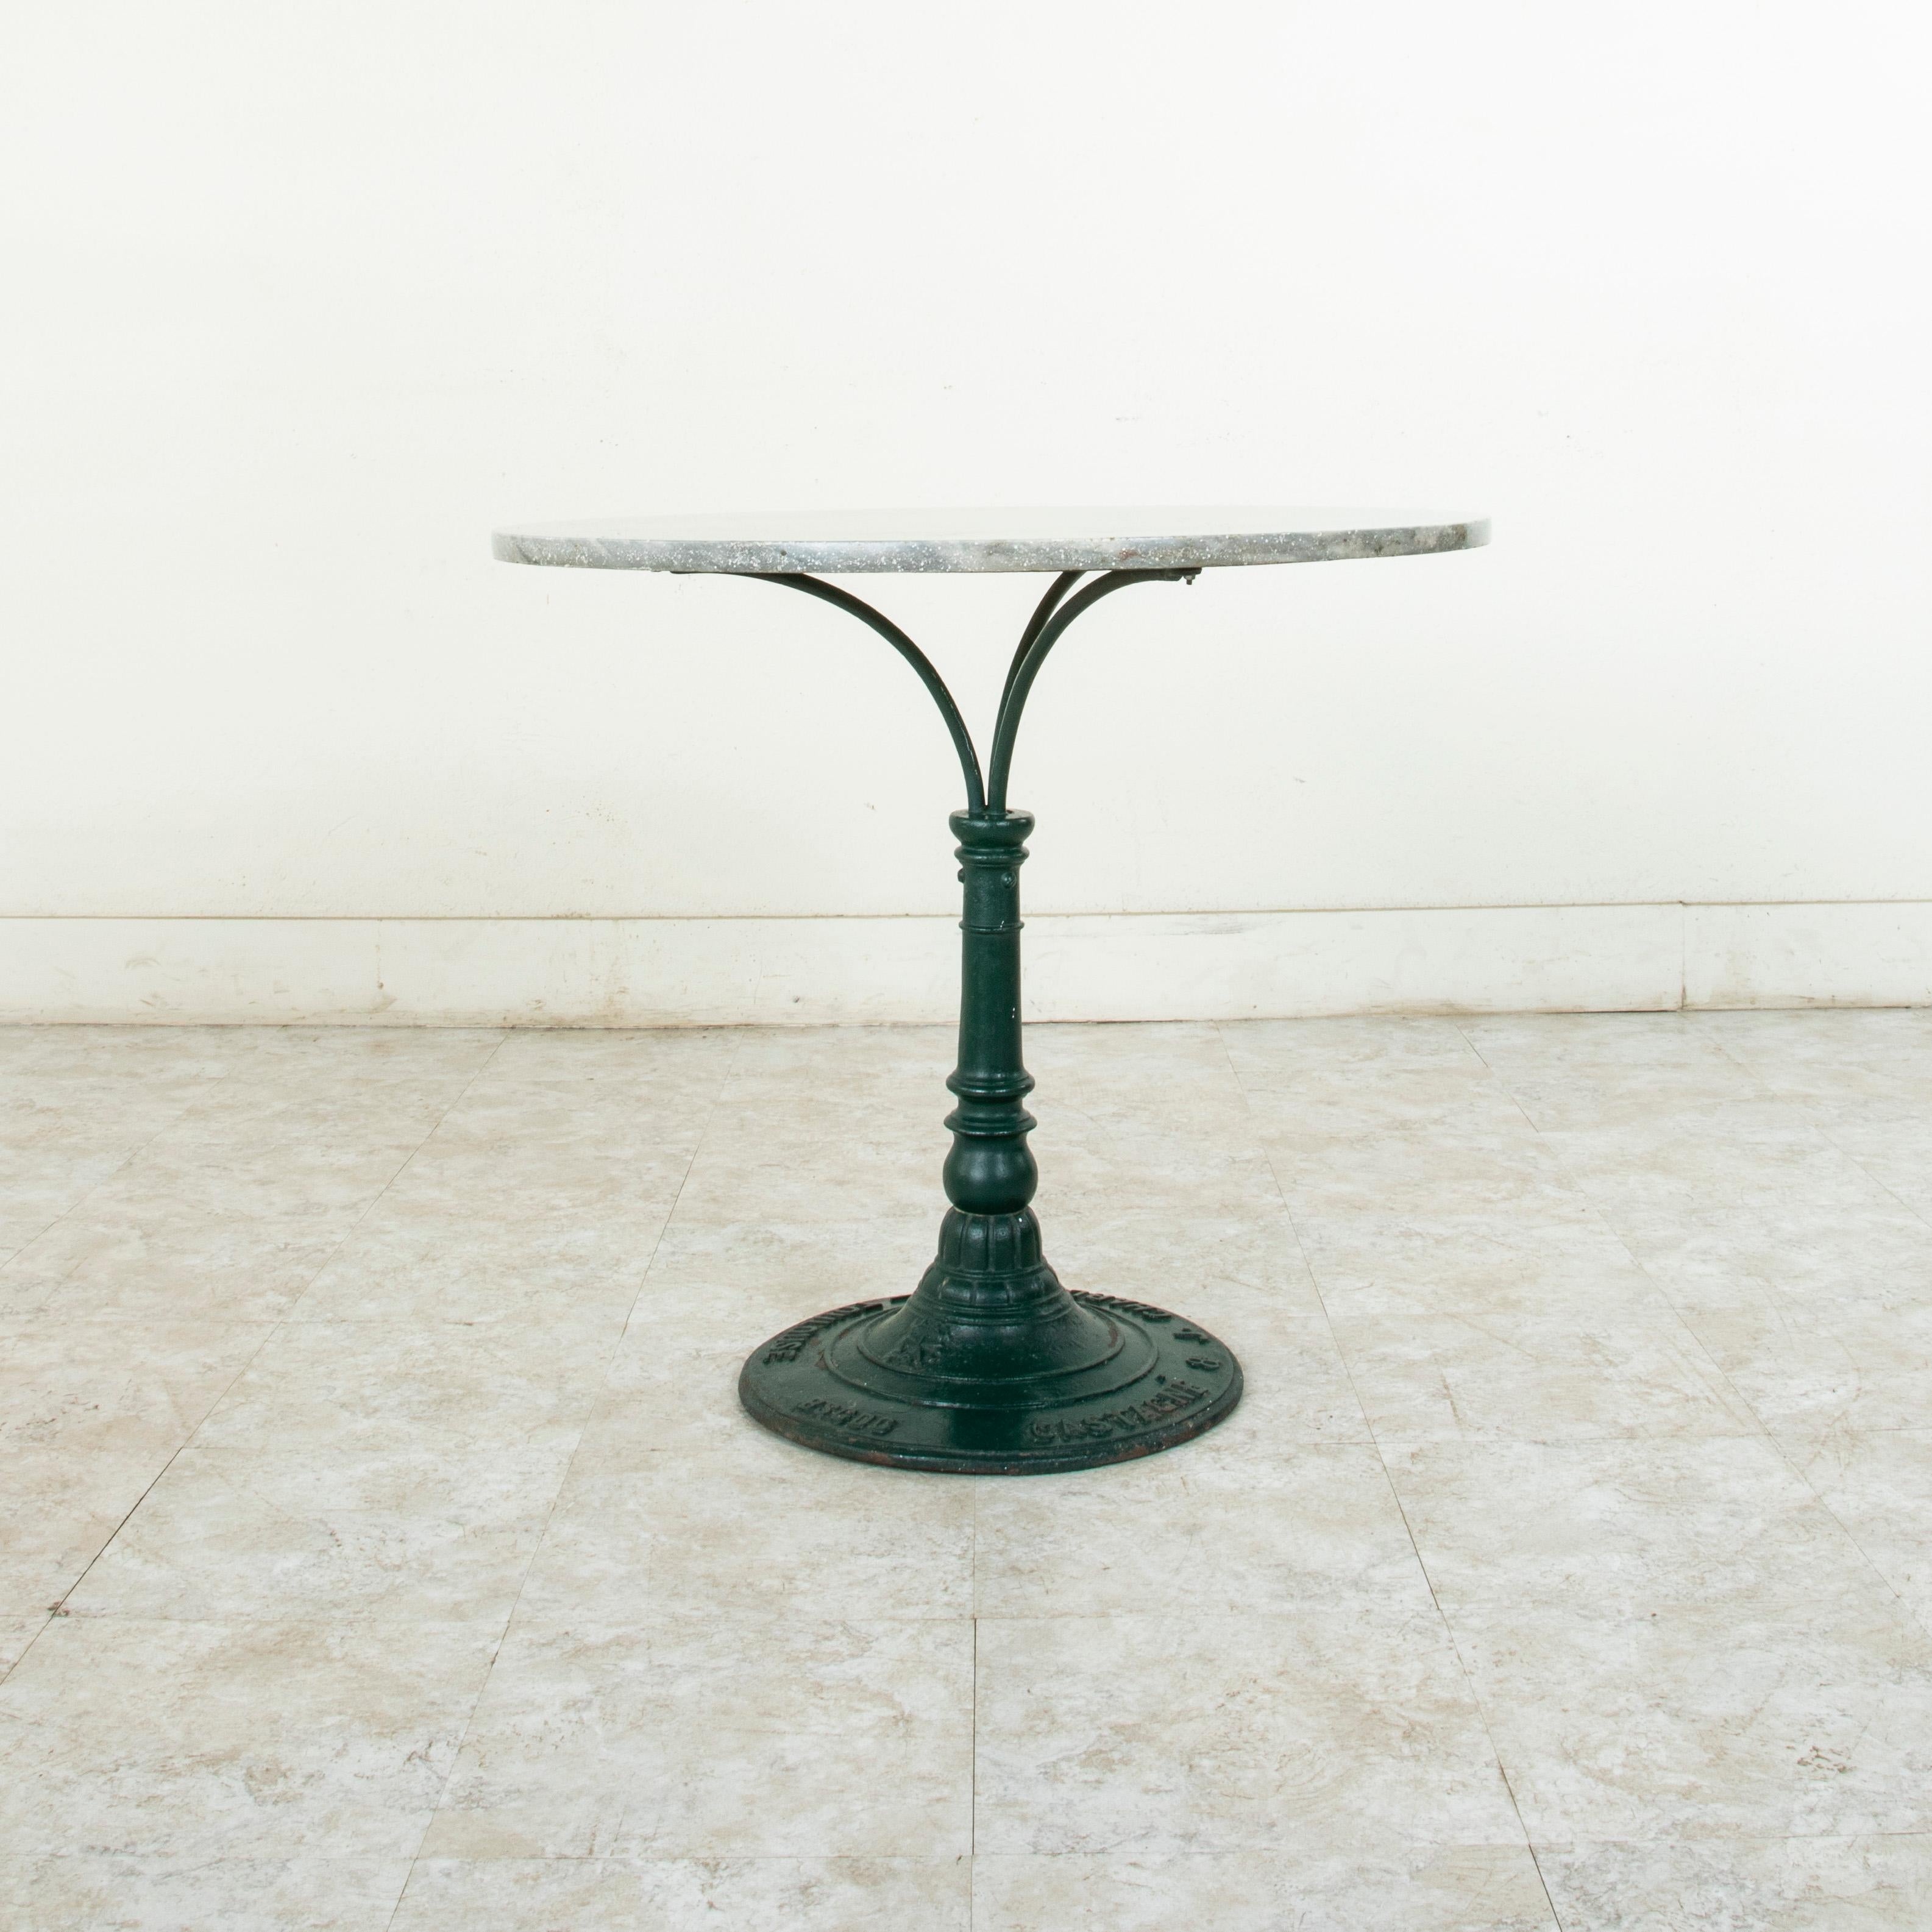 This French cast iron pedestal table or garden table from the turn of the 20th century features a handsome pale grey marble top with black and white veining. Its green painted cast iron footed base is marked by the maker Castagne &